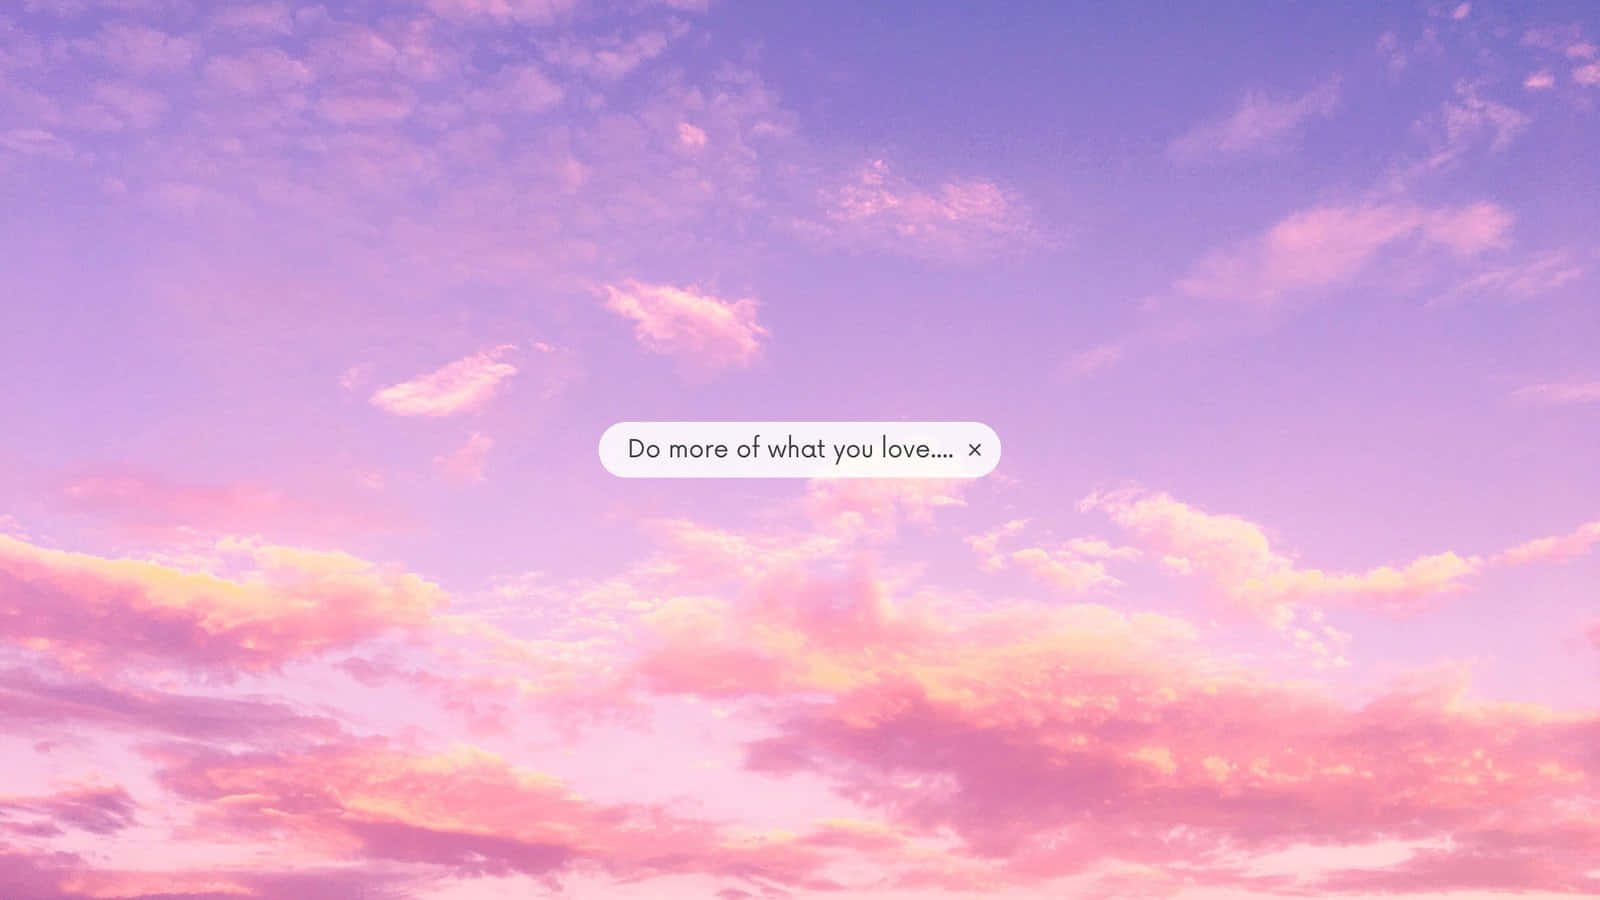 Do more of what you love, Pastel pink aesthetic